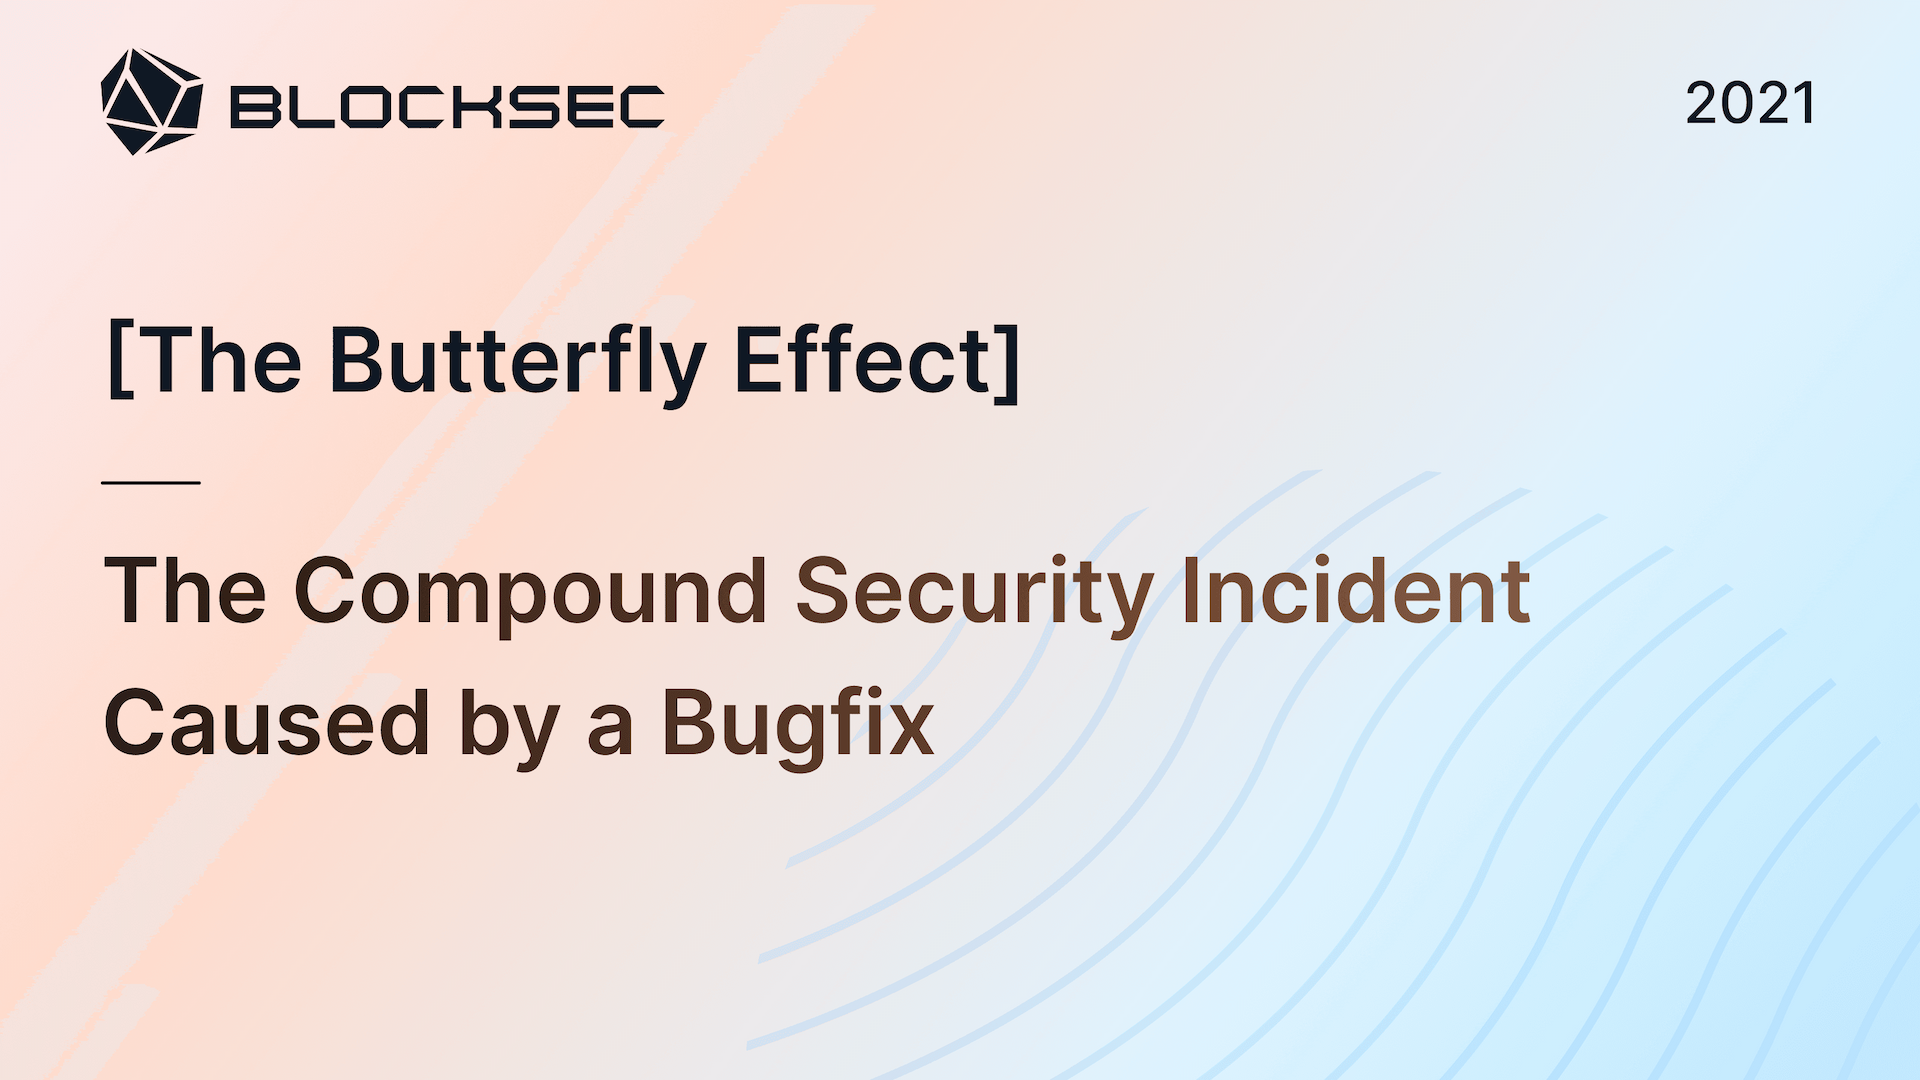 [The Butterfly Effect] The Compound Security Incident Caused by a Bugfix